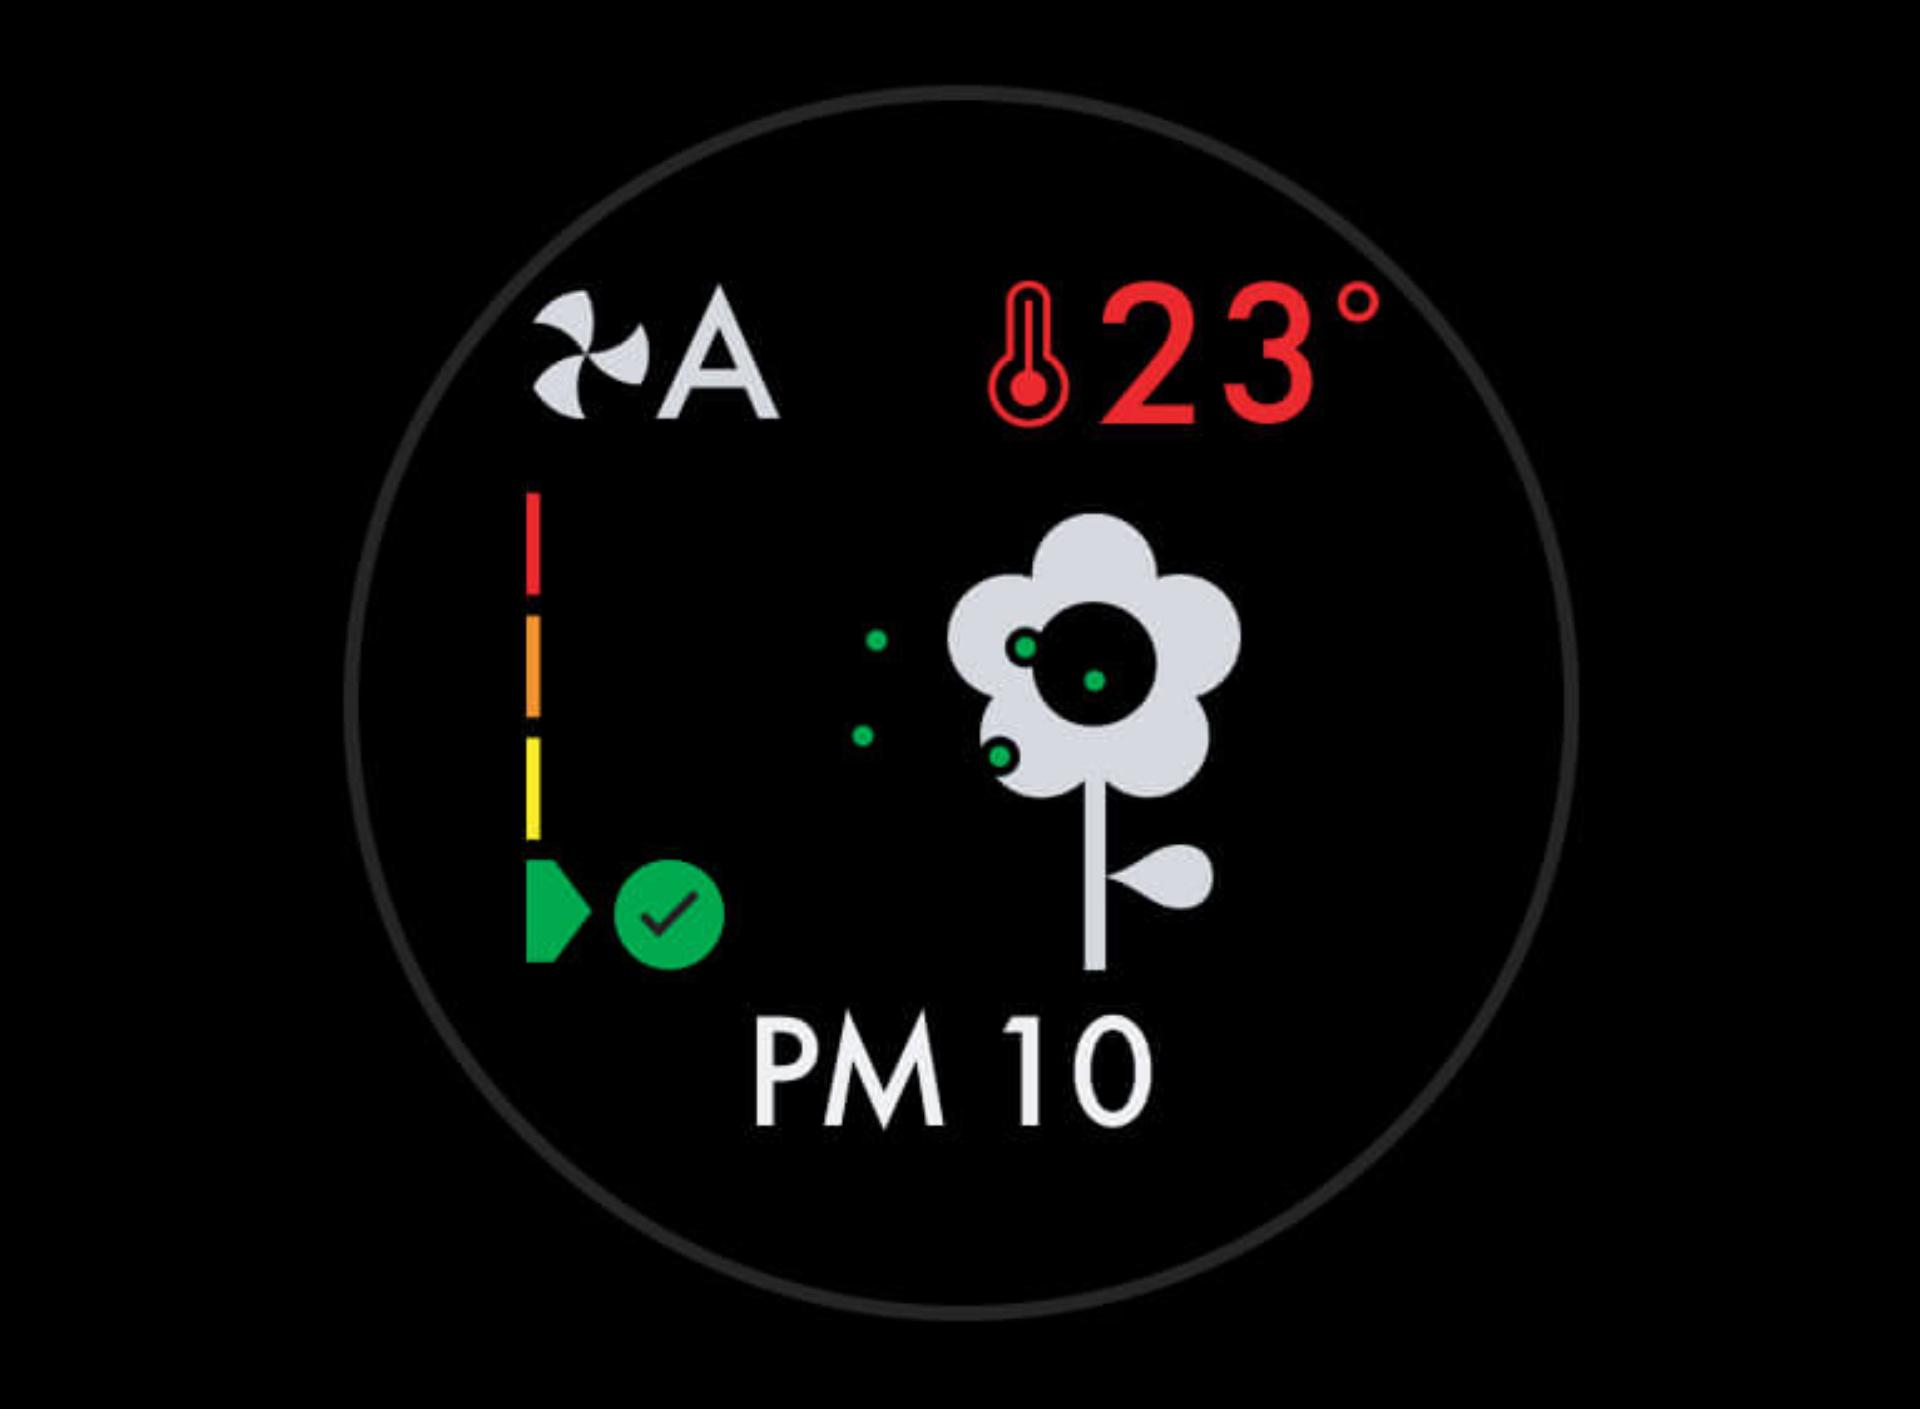 The LCD screen's icons showing different levels of pollutants